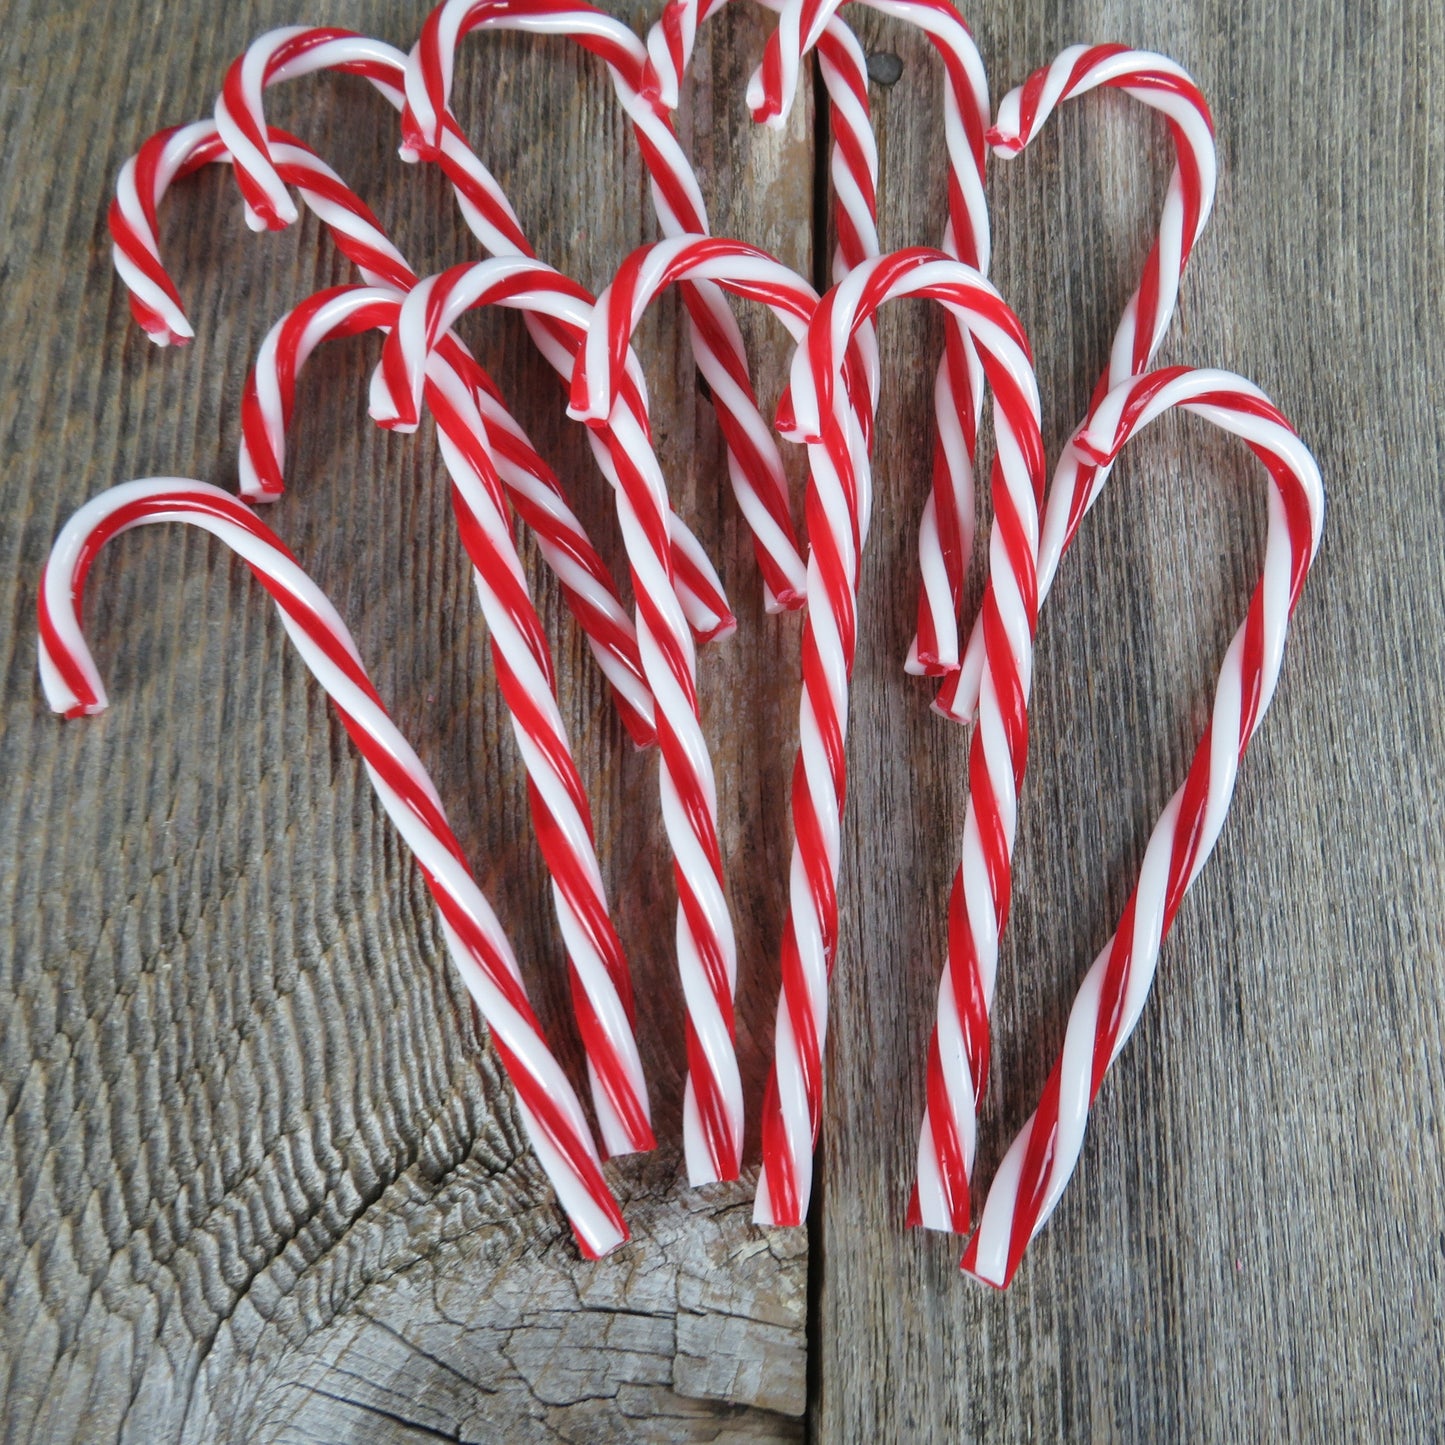 Candy Cane Christmas Embellishment Plastic Red and White Twisted Craft Ornament Faux Hard Candy Bowl Vase Filler